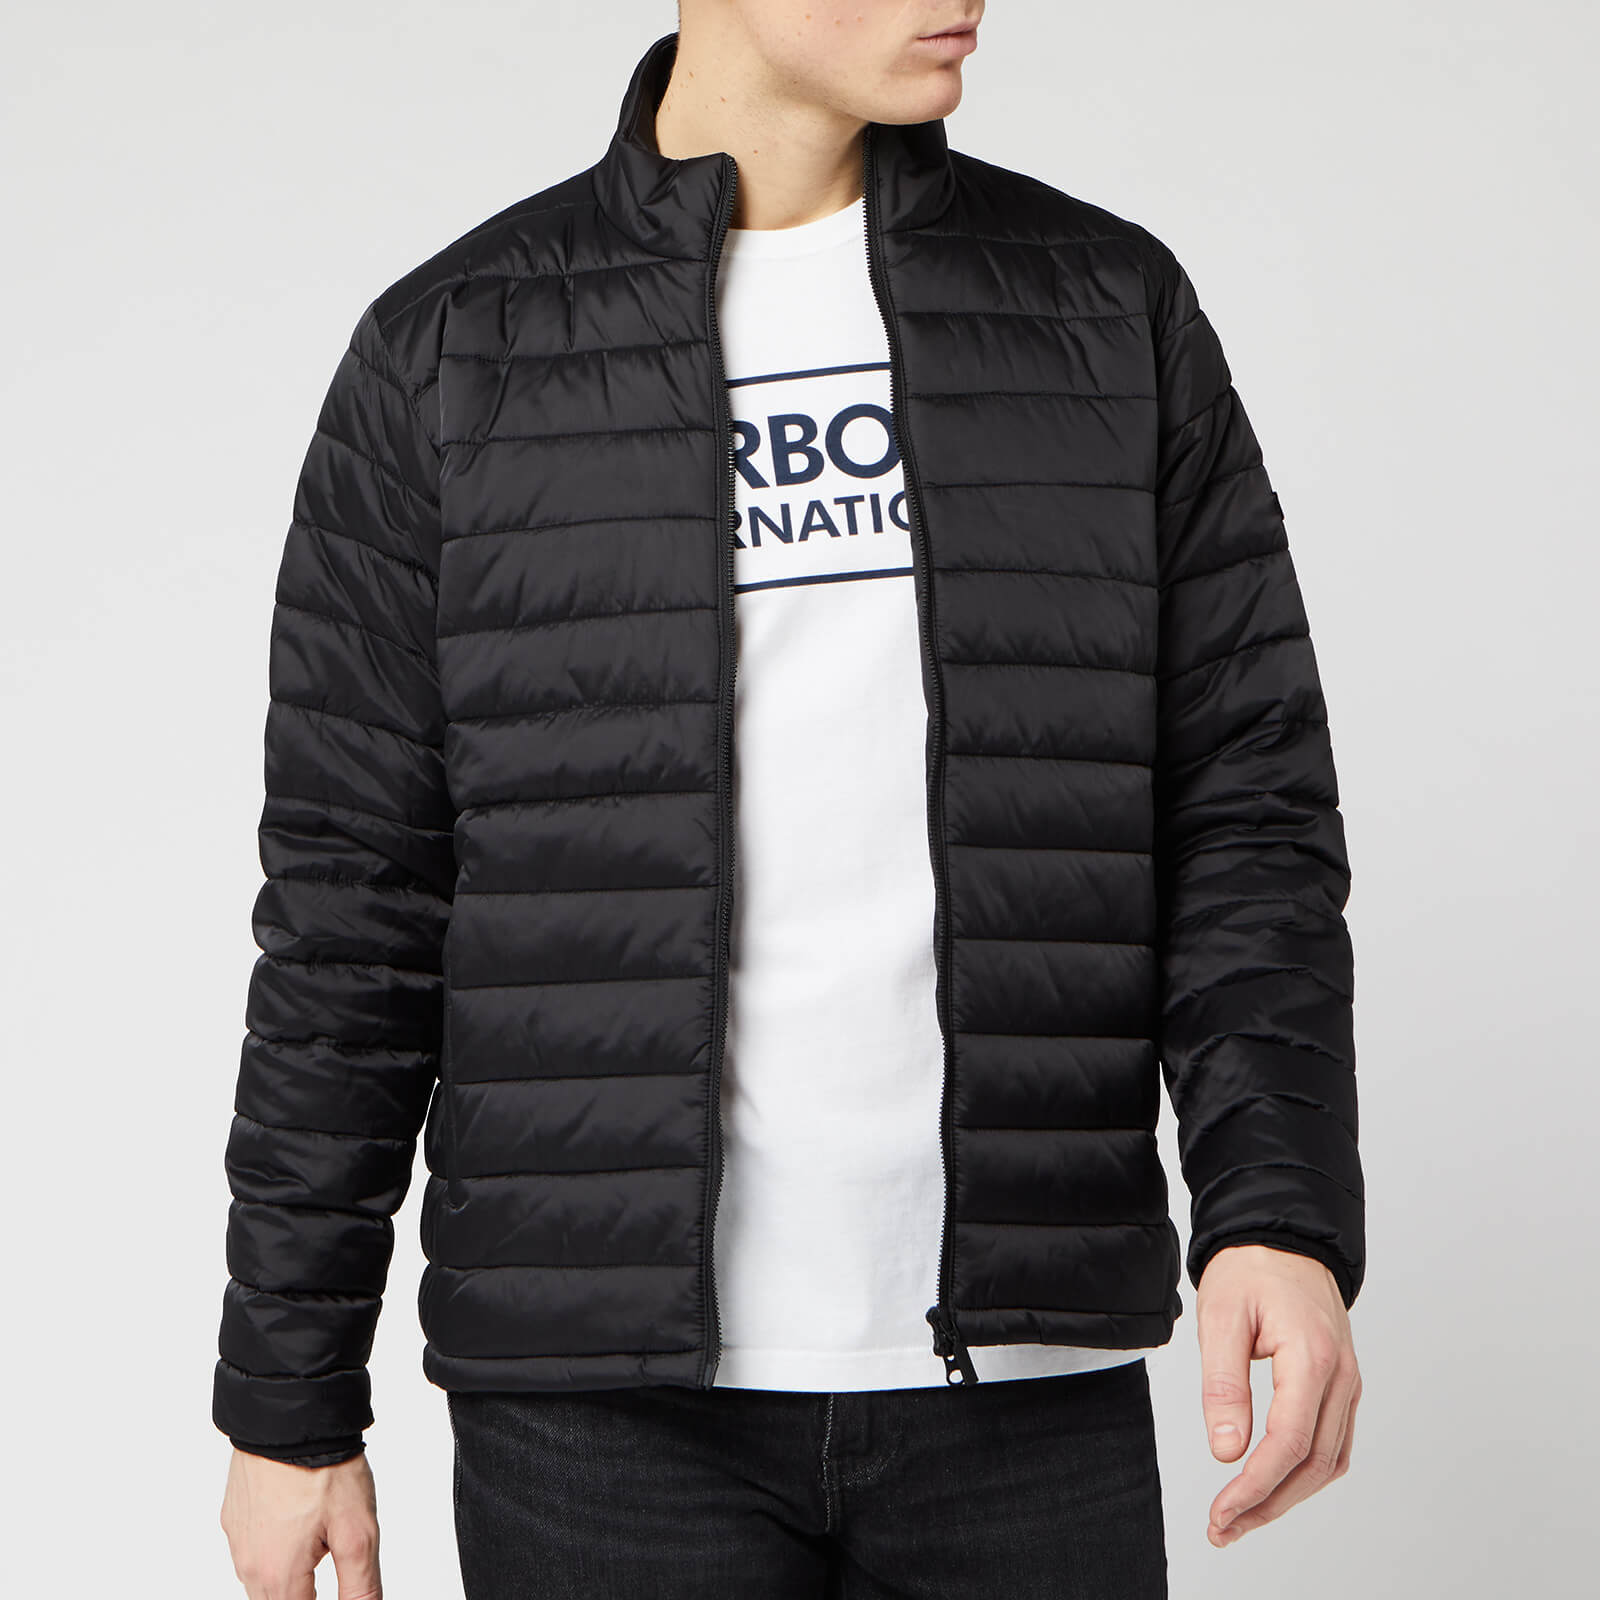 Barbour Quilted Black Jacket Cheap Sale, 58% OFF | www.groupgolden.com